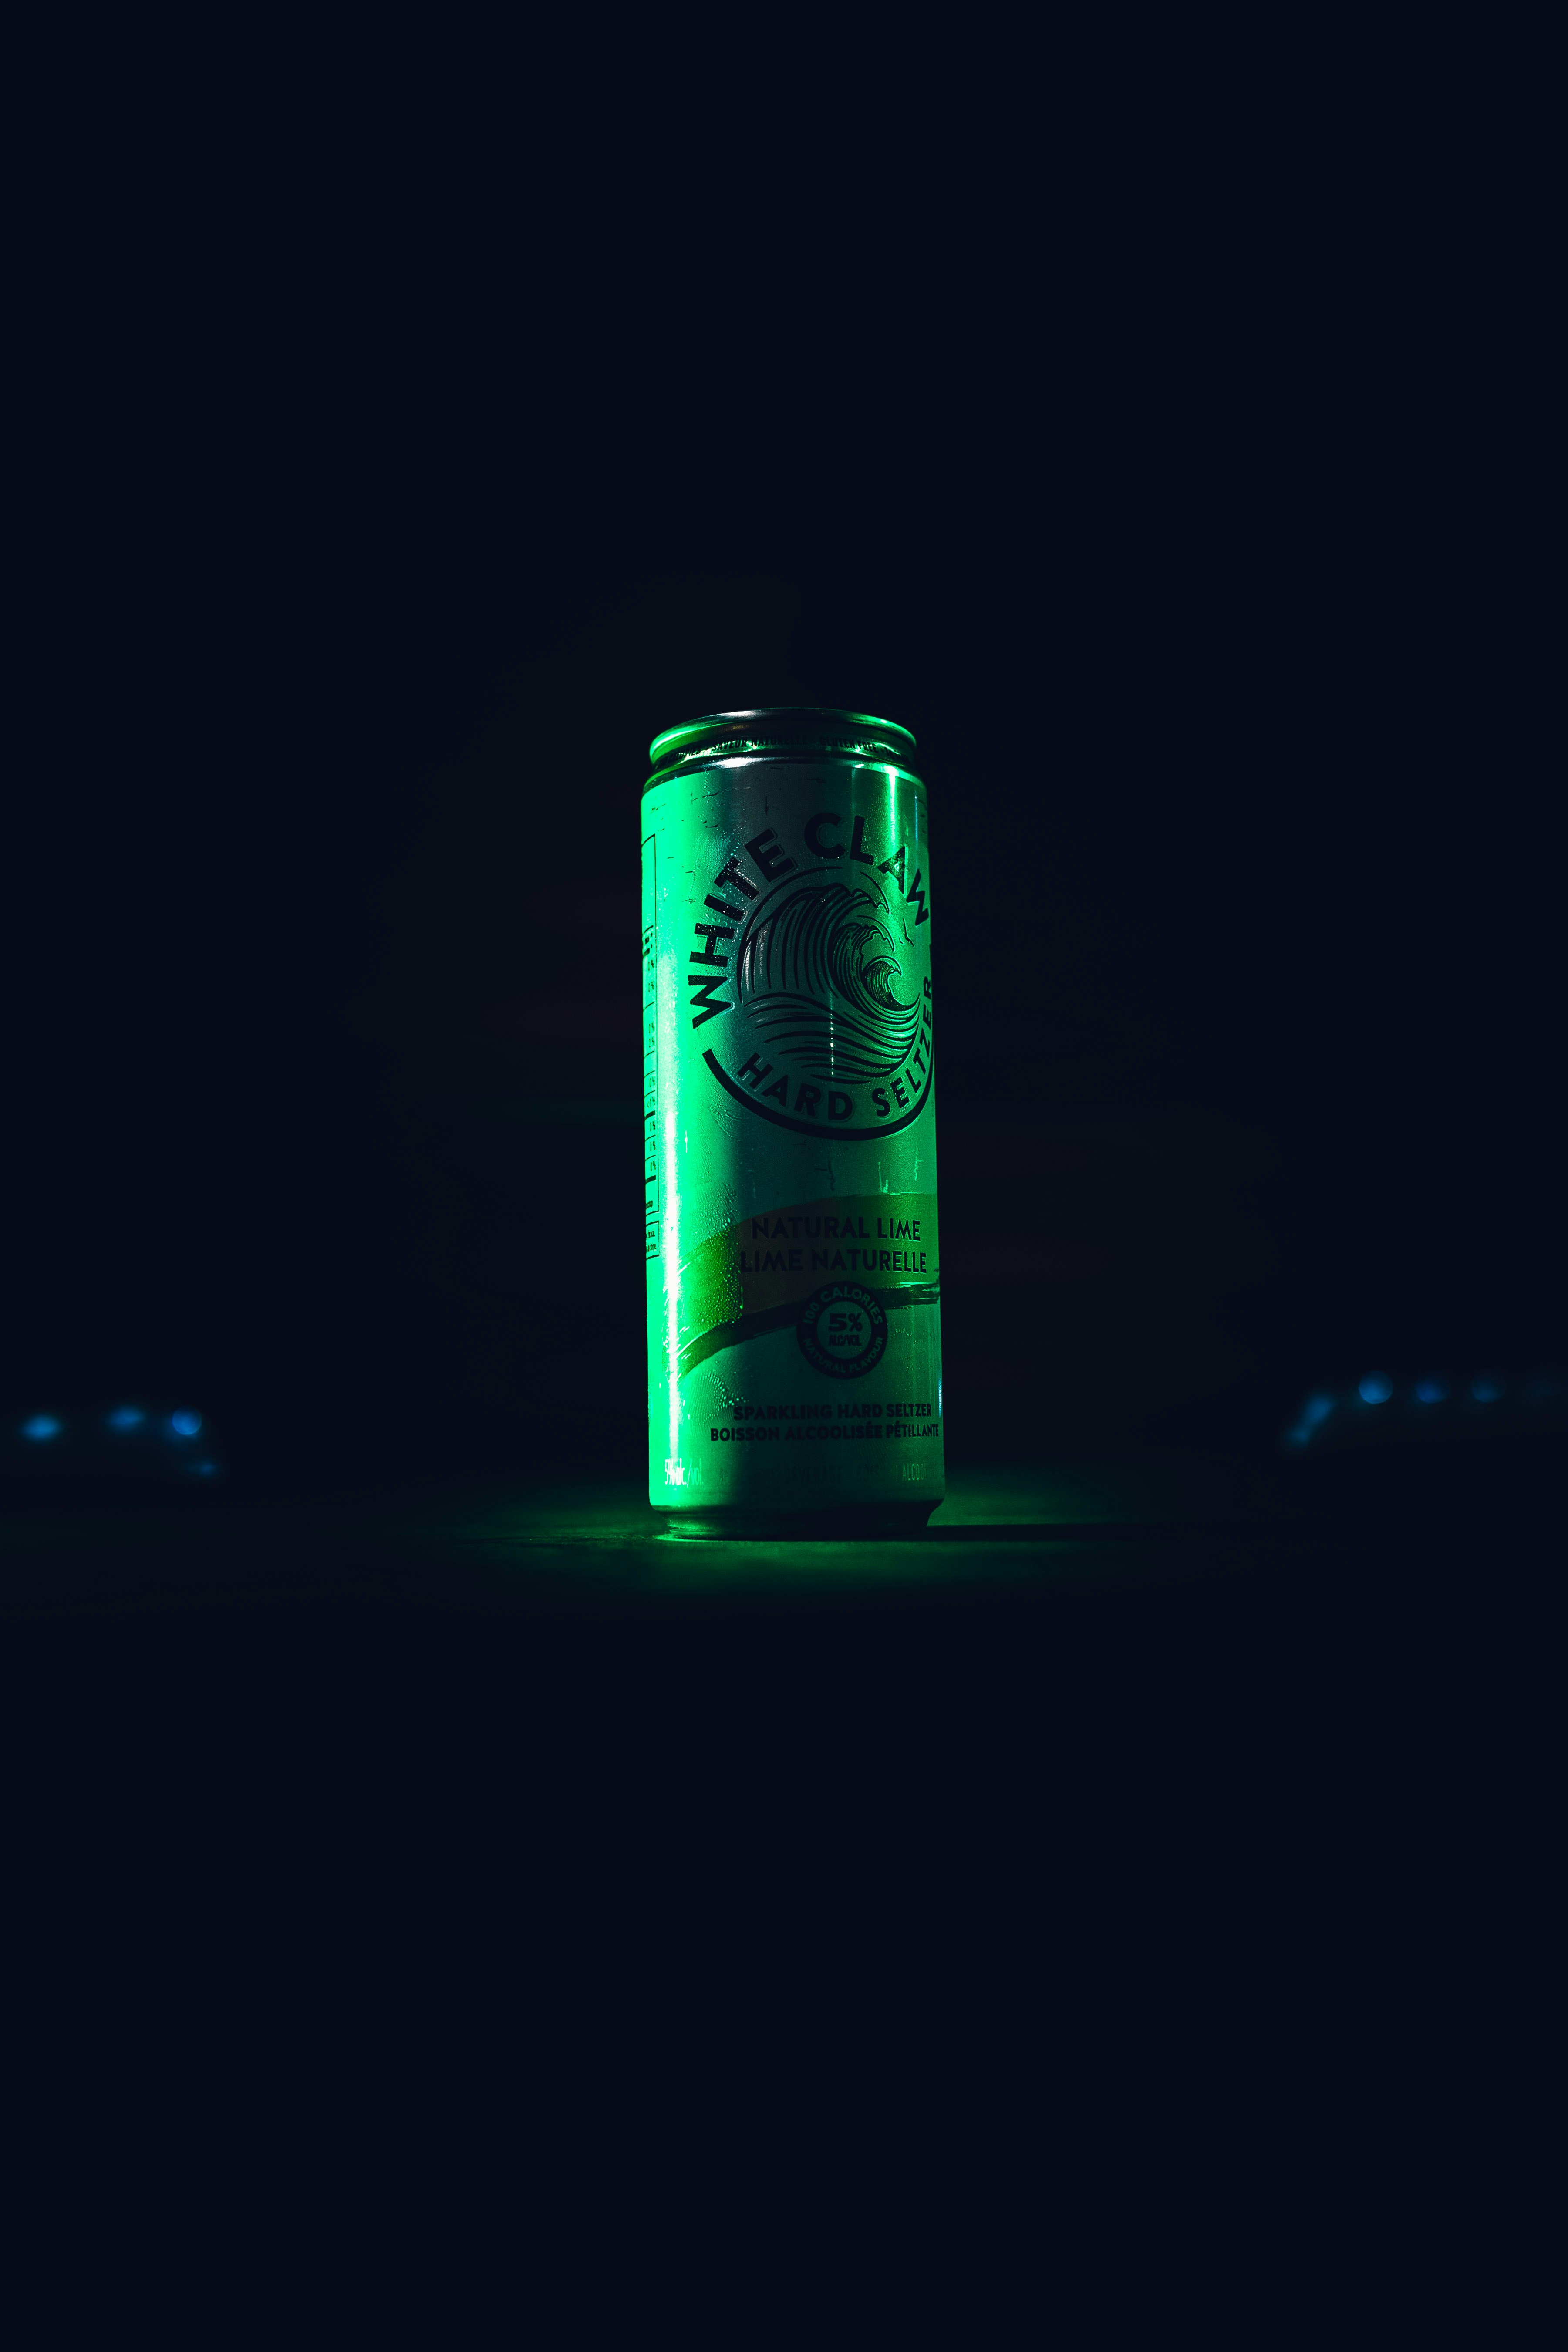 green and white can on black surface